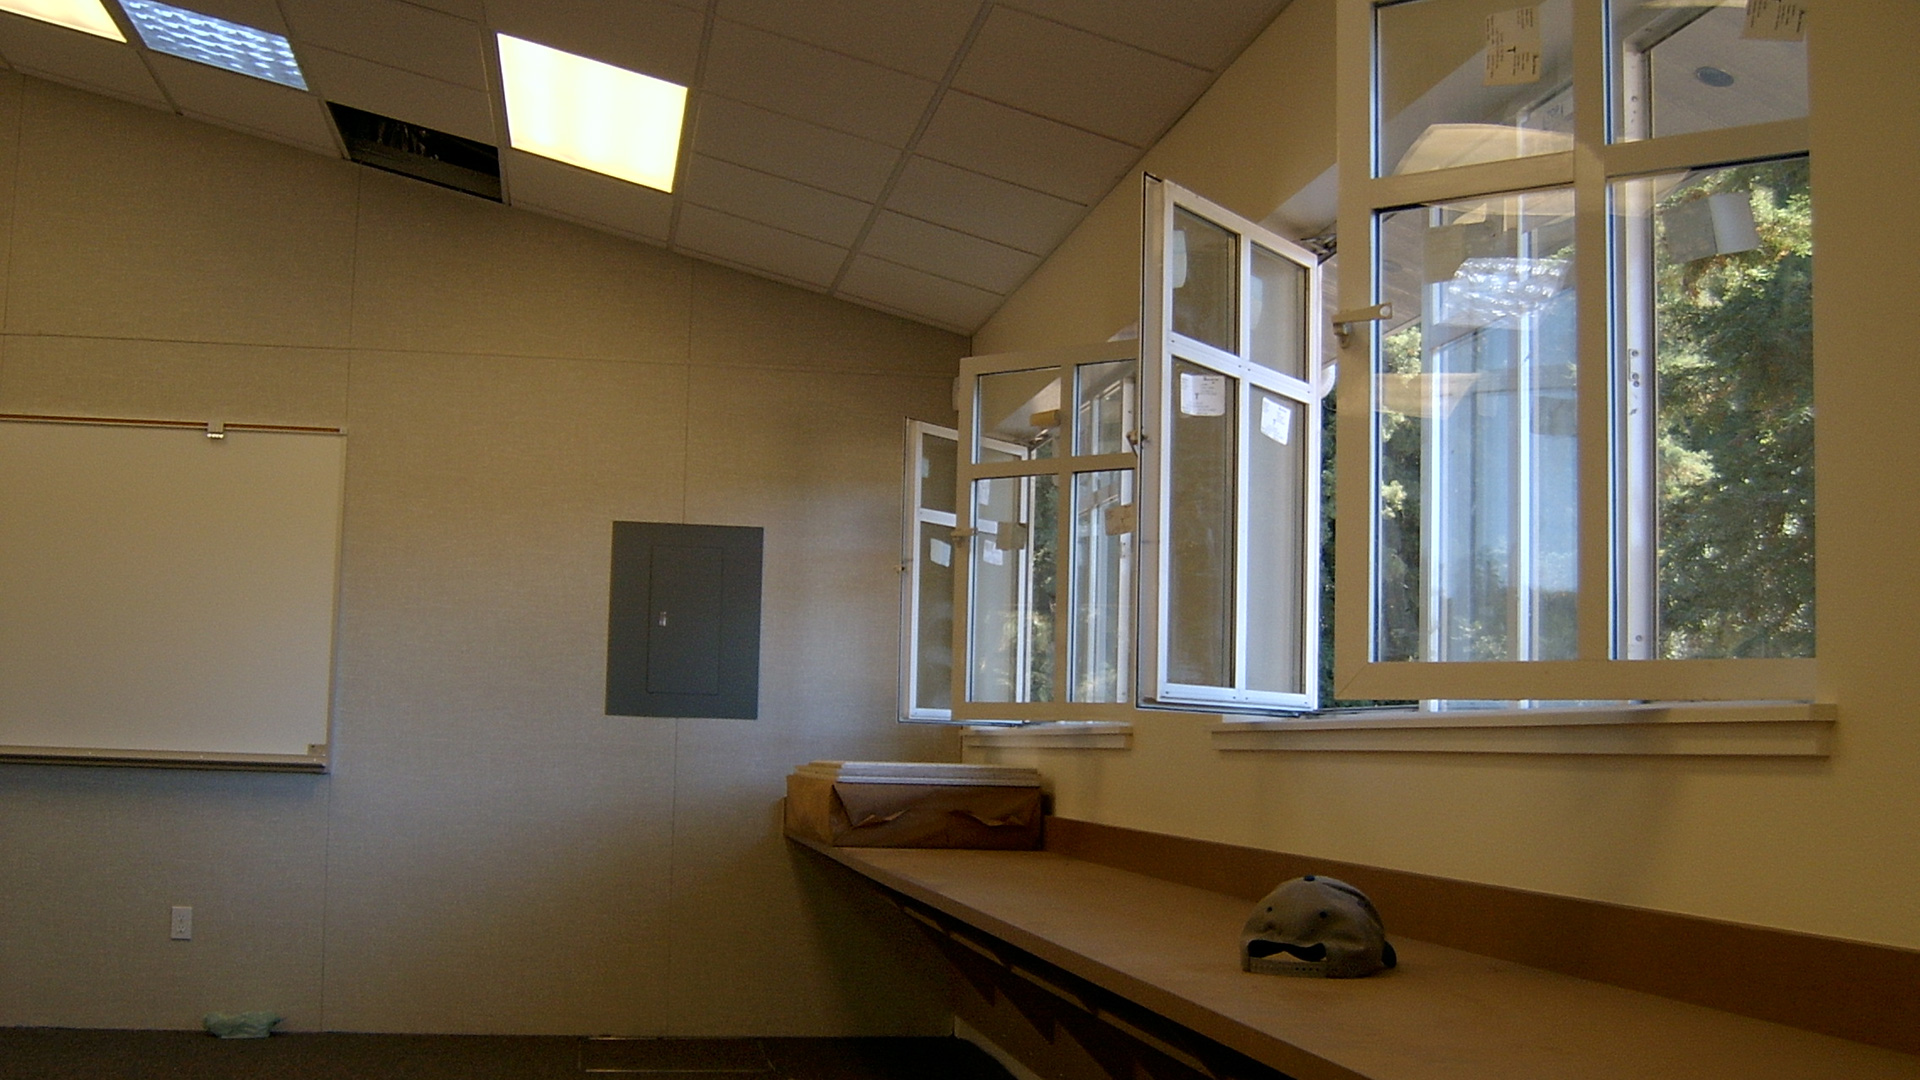 Interior of new classrooms, with vaulted ceilings, operable windows, and brown desks.